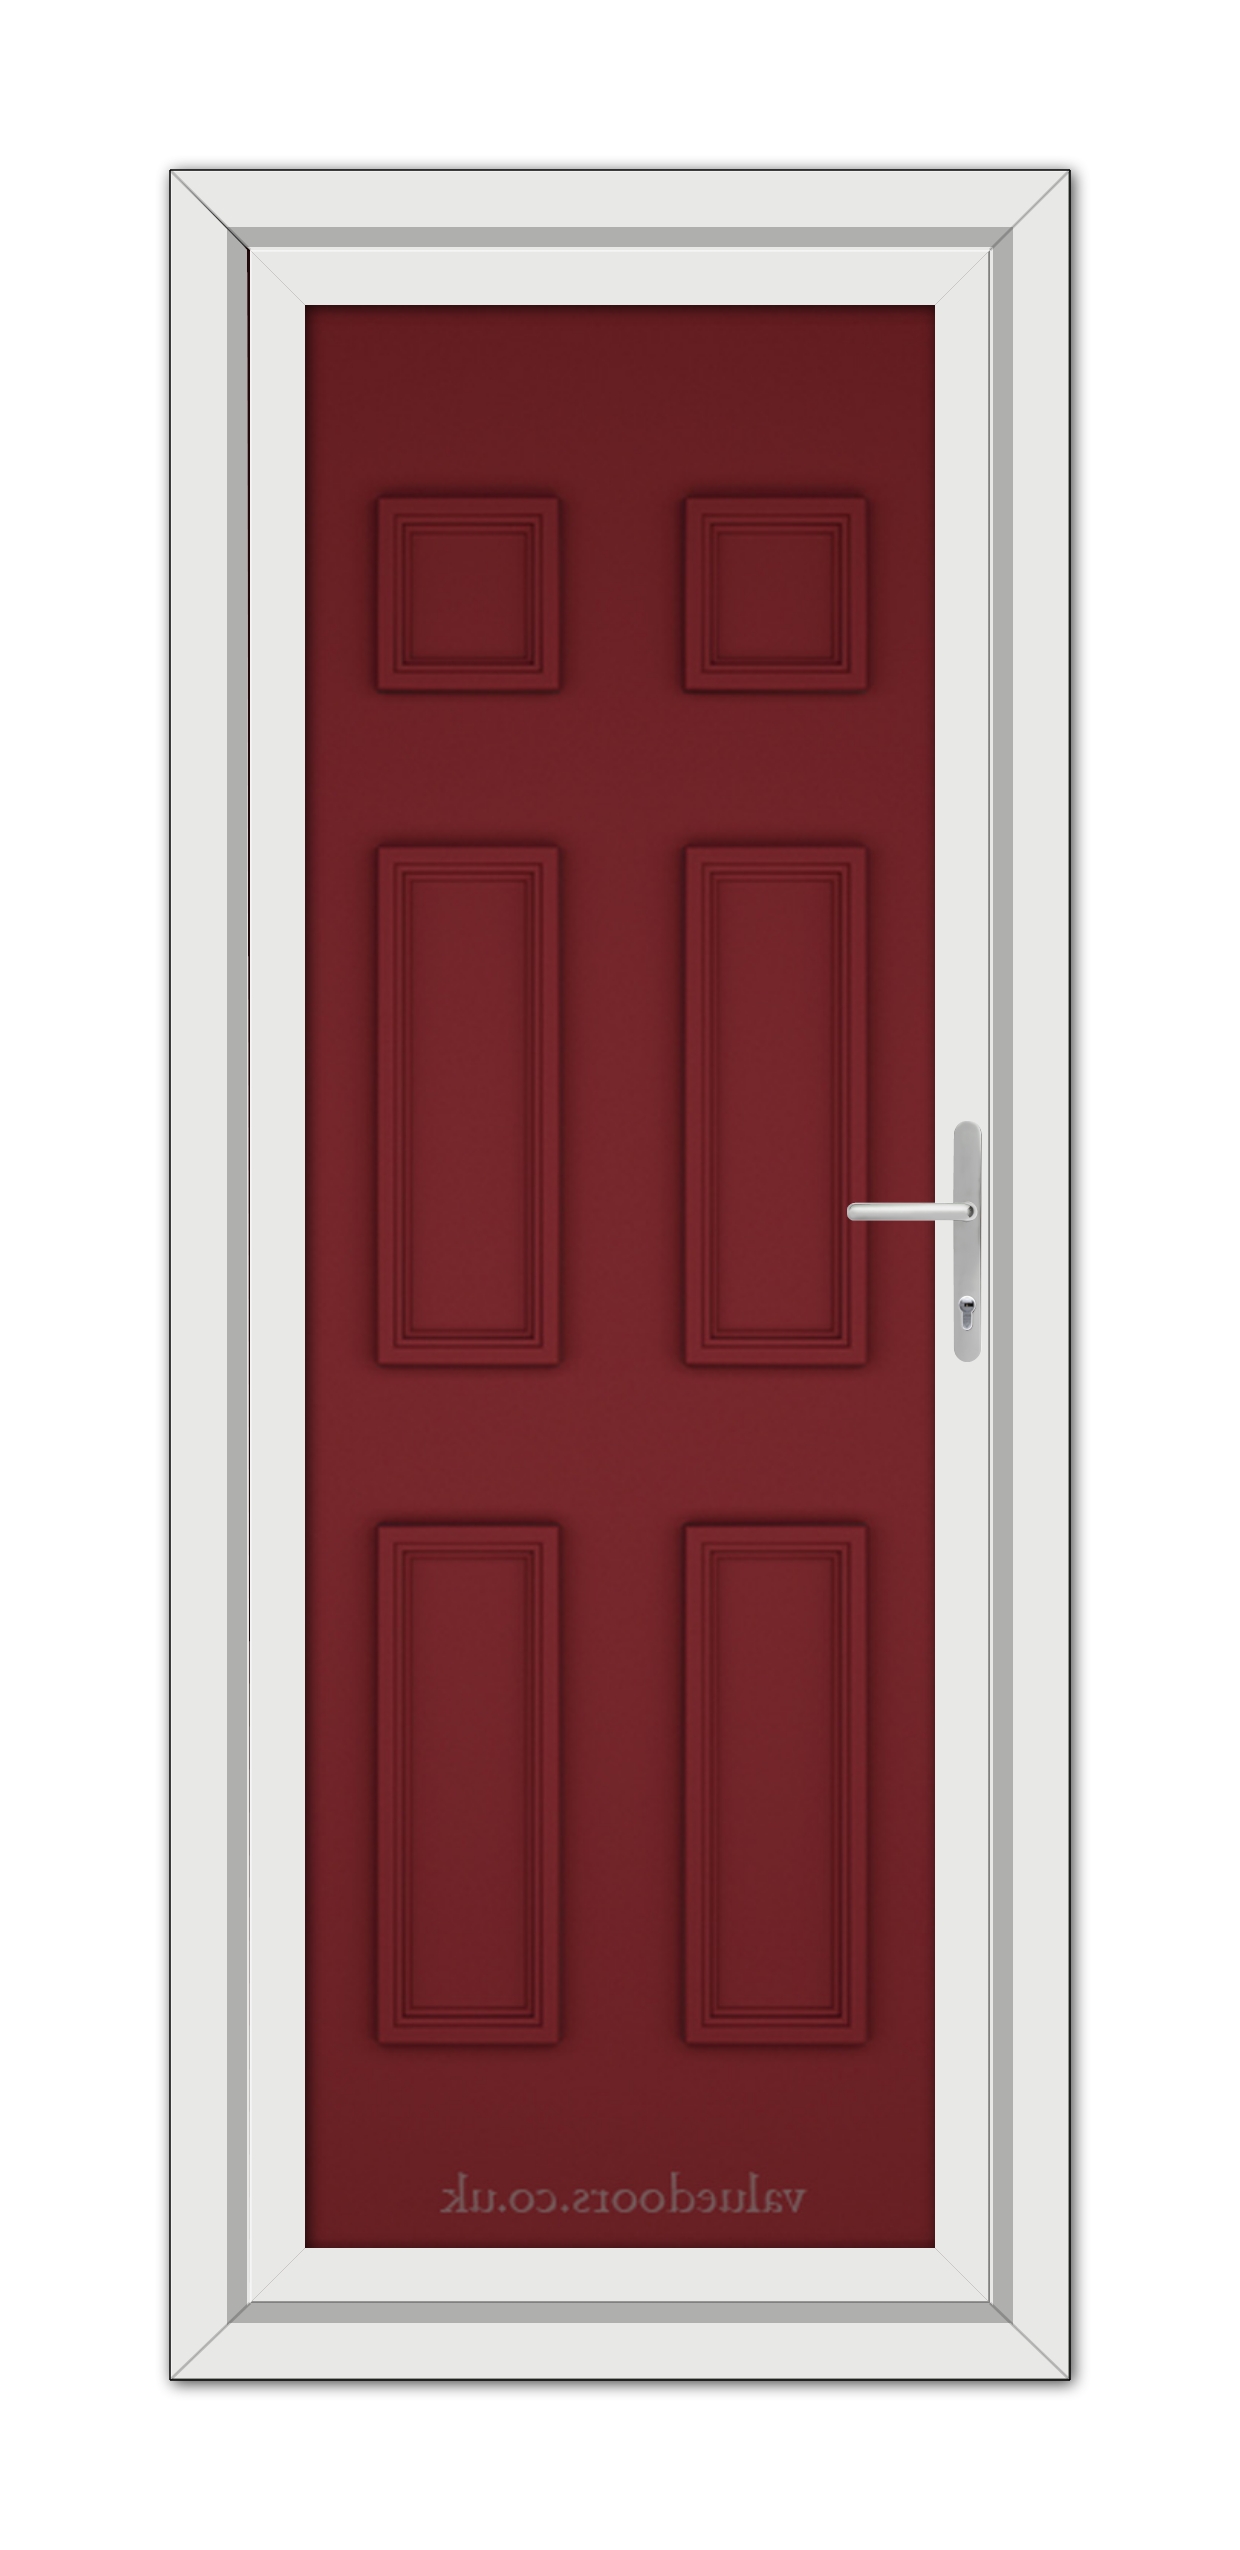 A vertical image of a closed Red Windsor Solid uPVC Door with six panels, framed in white, featuring a silver handle on the right side.